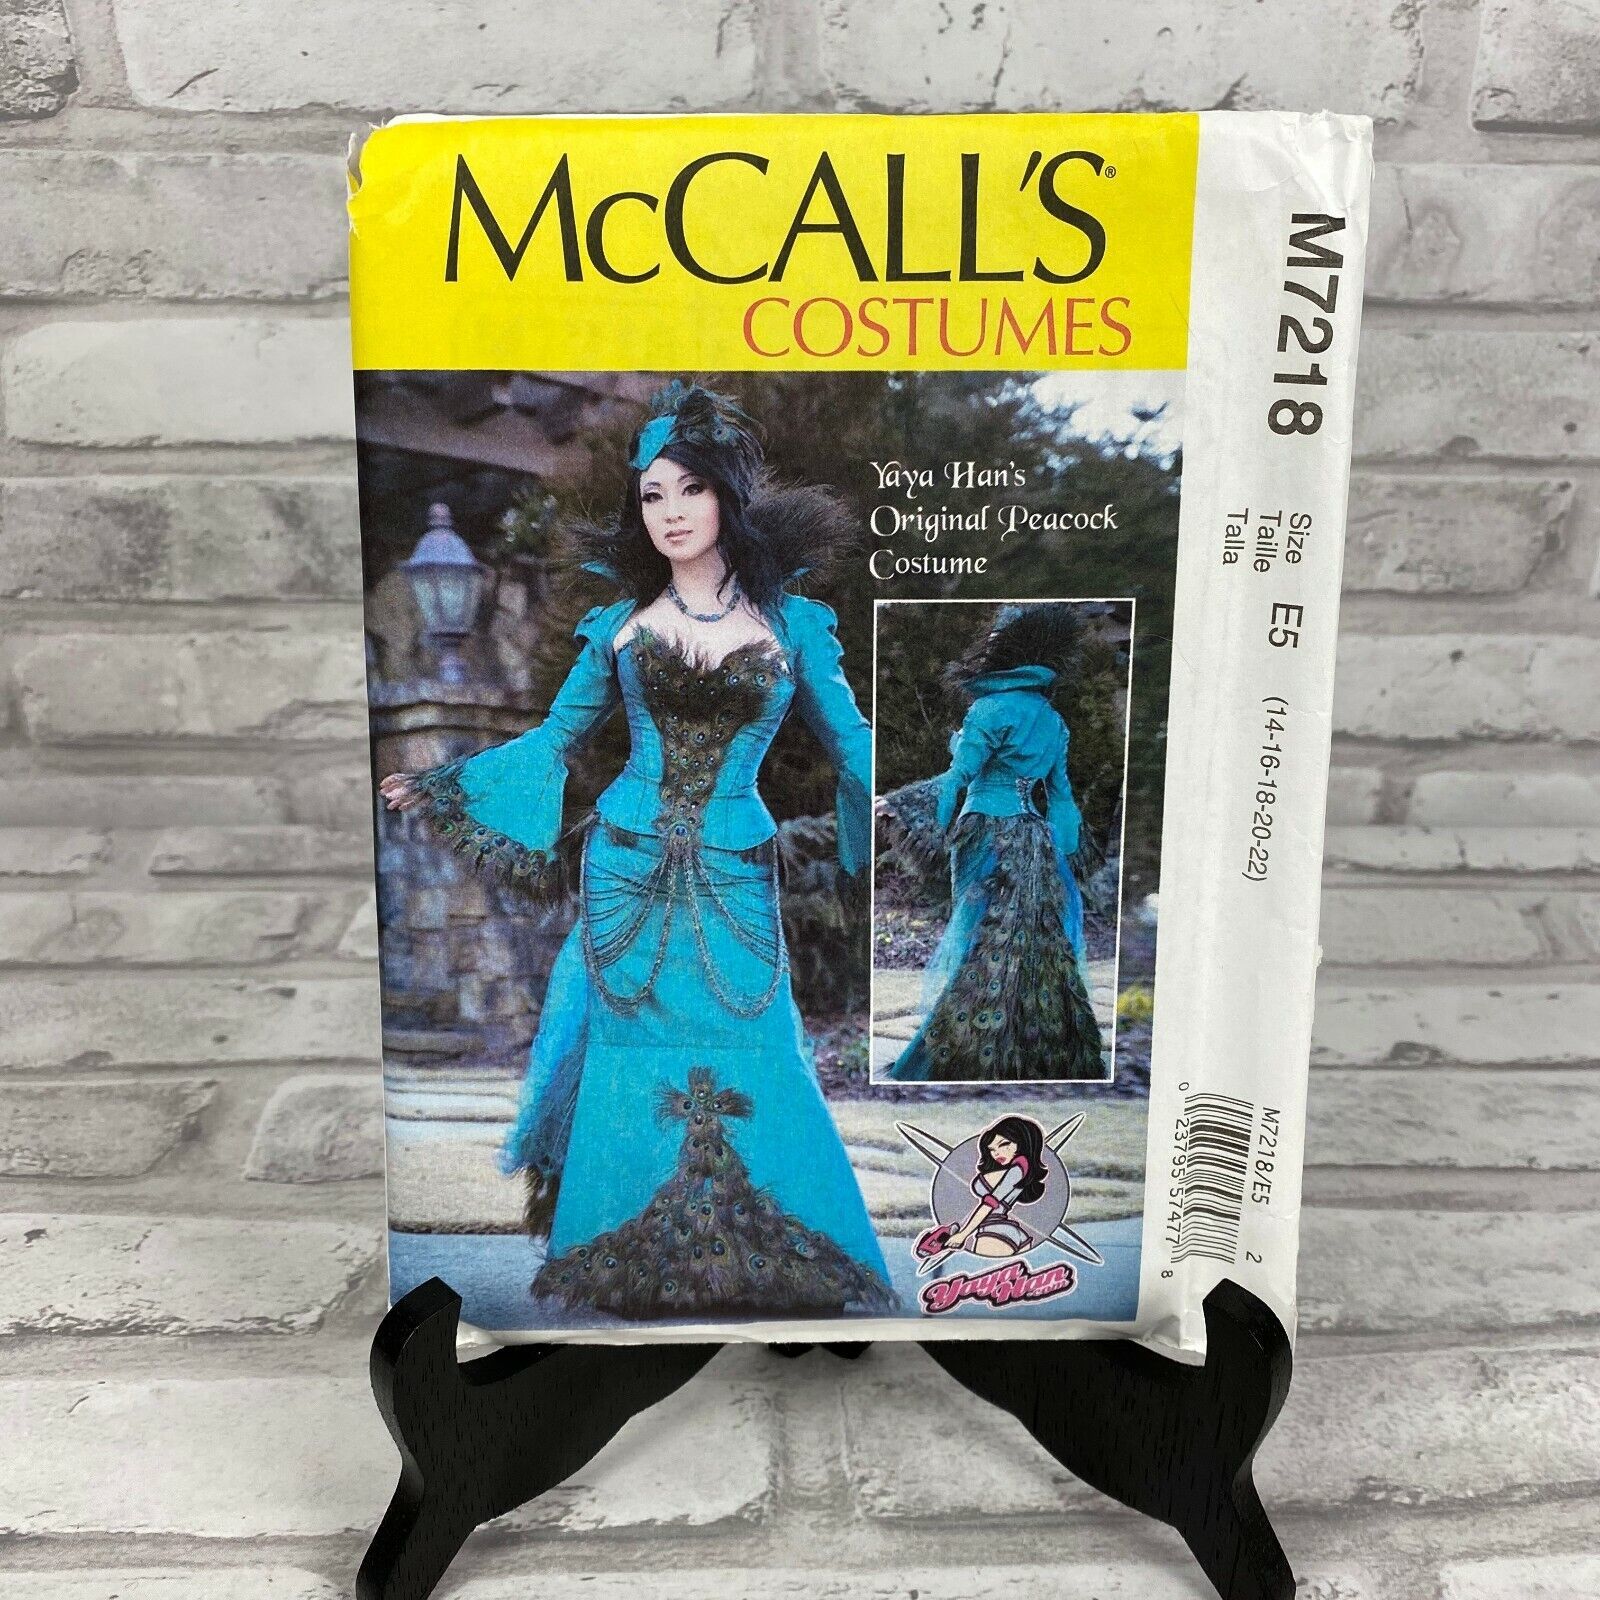 M7218 McCall's Sewing Pattern Cosplay Costume Peacock Jacket Corset by Yaya Han  - $8.99